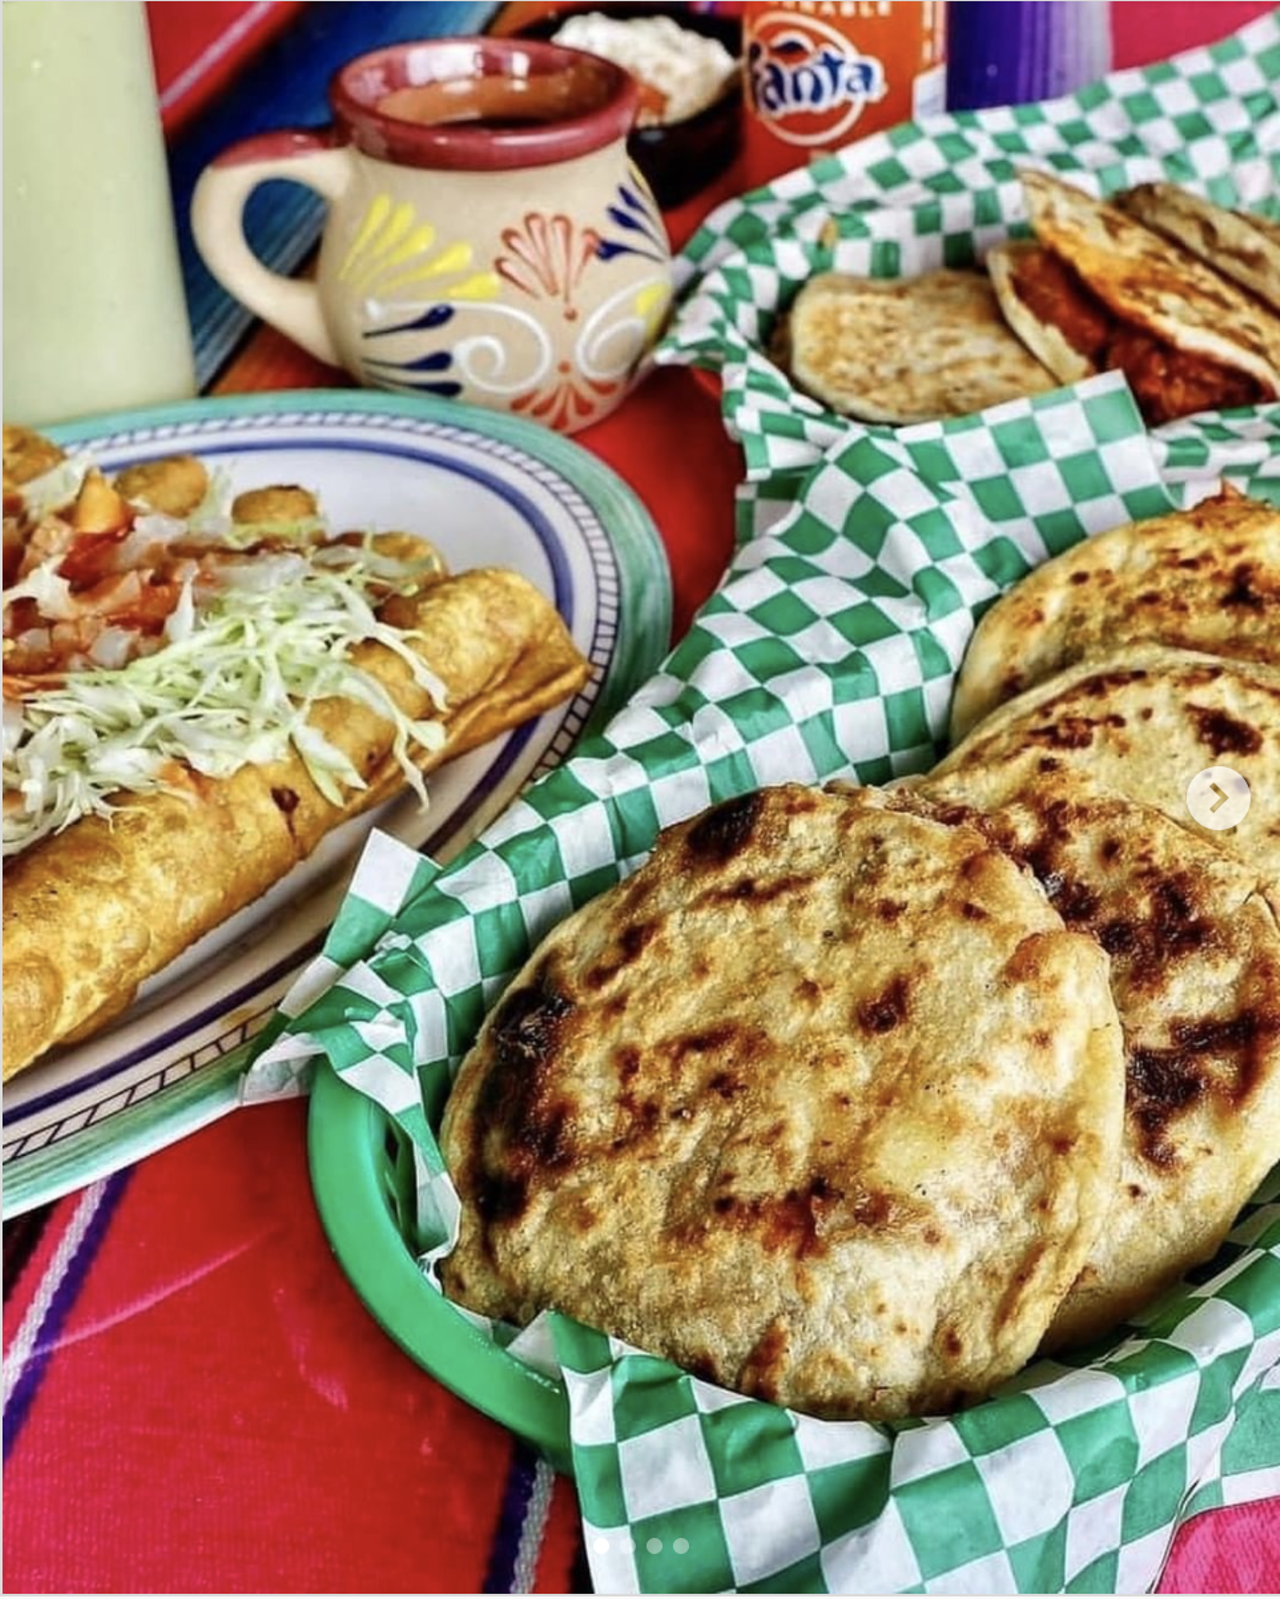 Gorditas Mi Torreón
5201 S Flores St, (210) 908-9617, facebook.com/vaneemota82
It's cheap. It's good. And it's authentic. Gorditos Mi Torreón serves up guisos like asado, frijoles con queso, and papas rojas, and all for under $3. Don't forget to pair your order with one of their authentic Mexican cokes or freshly squeezed juices. 
Photo via Instagram / Gorditas_mi_torreon